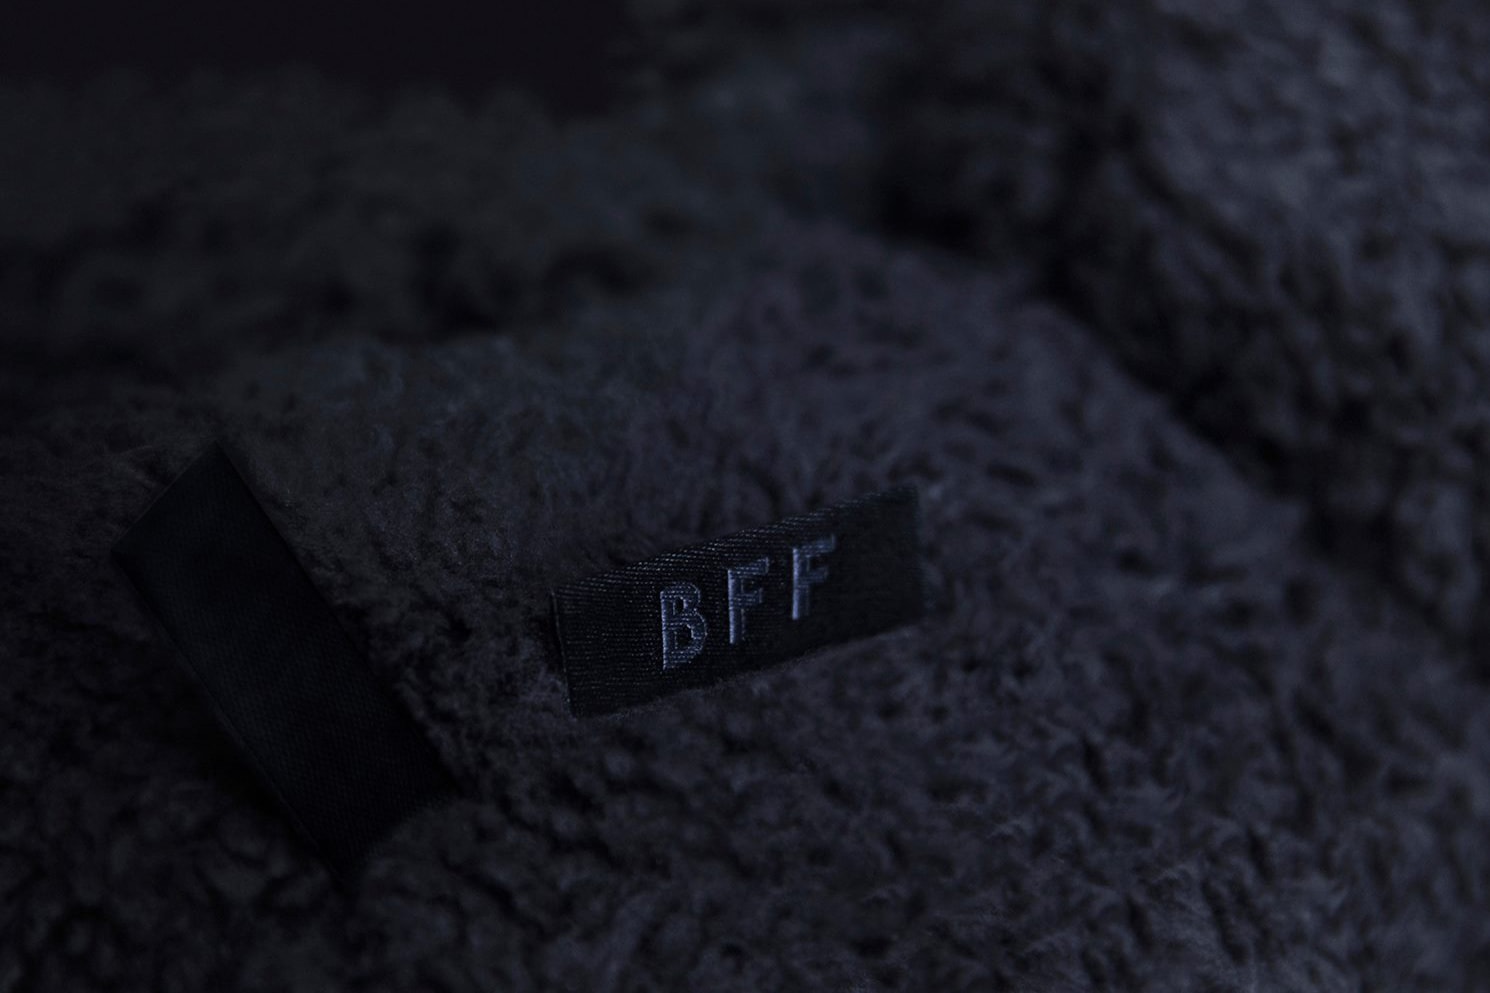 kaws bff black edition for where the end starts